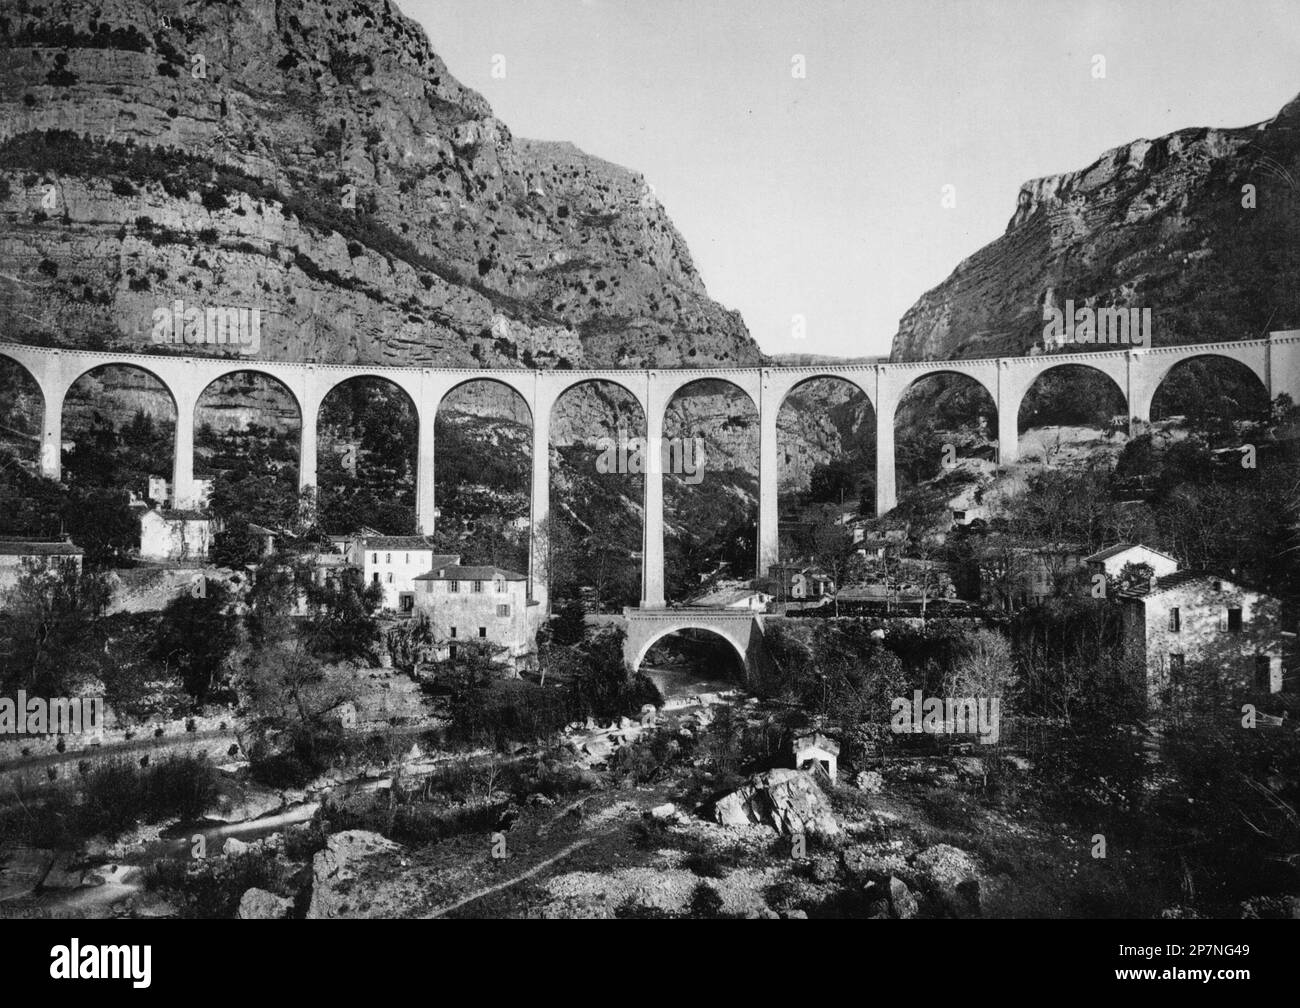 'English:  Old Central Railway Var. Bridge was destroyed by retreating German troops when on August 24, 1944. Only the pillars remain. Français :  Seules, les piles de l'ouvrage subsistent aujourd'hui.; between 1890 and 1905 date QS:P,+1500-00-00T00:00:00Z/6,P1319,+1890-00-00T00:00:00Z/9,P1326,+1905-00-00T00:00:00Z/9; Original image: Photochrom print (color photo lithograph) Reproduction number: LC-DIG-ppmsc-05051  from Library of Congress, Prints and Photographs Division, Photochrom Prints Collection        This image  is available from the United States Library of Congress's Prints and Photo Stock Photo